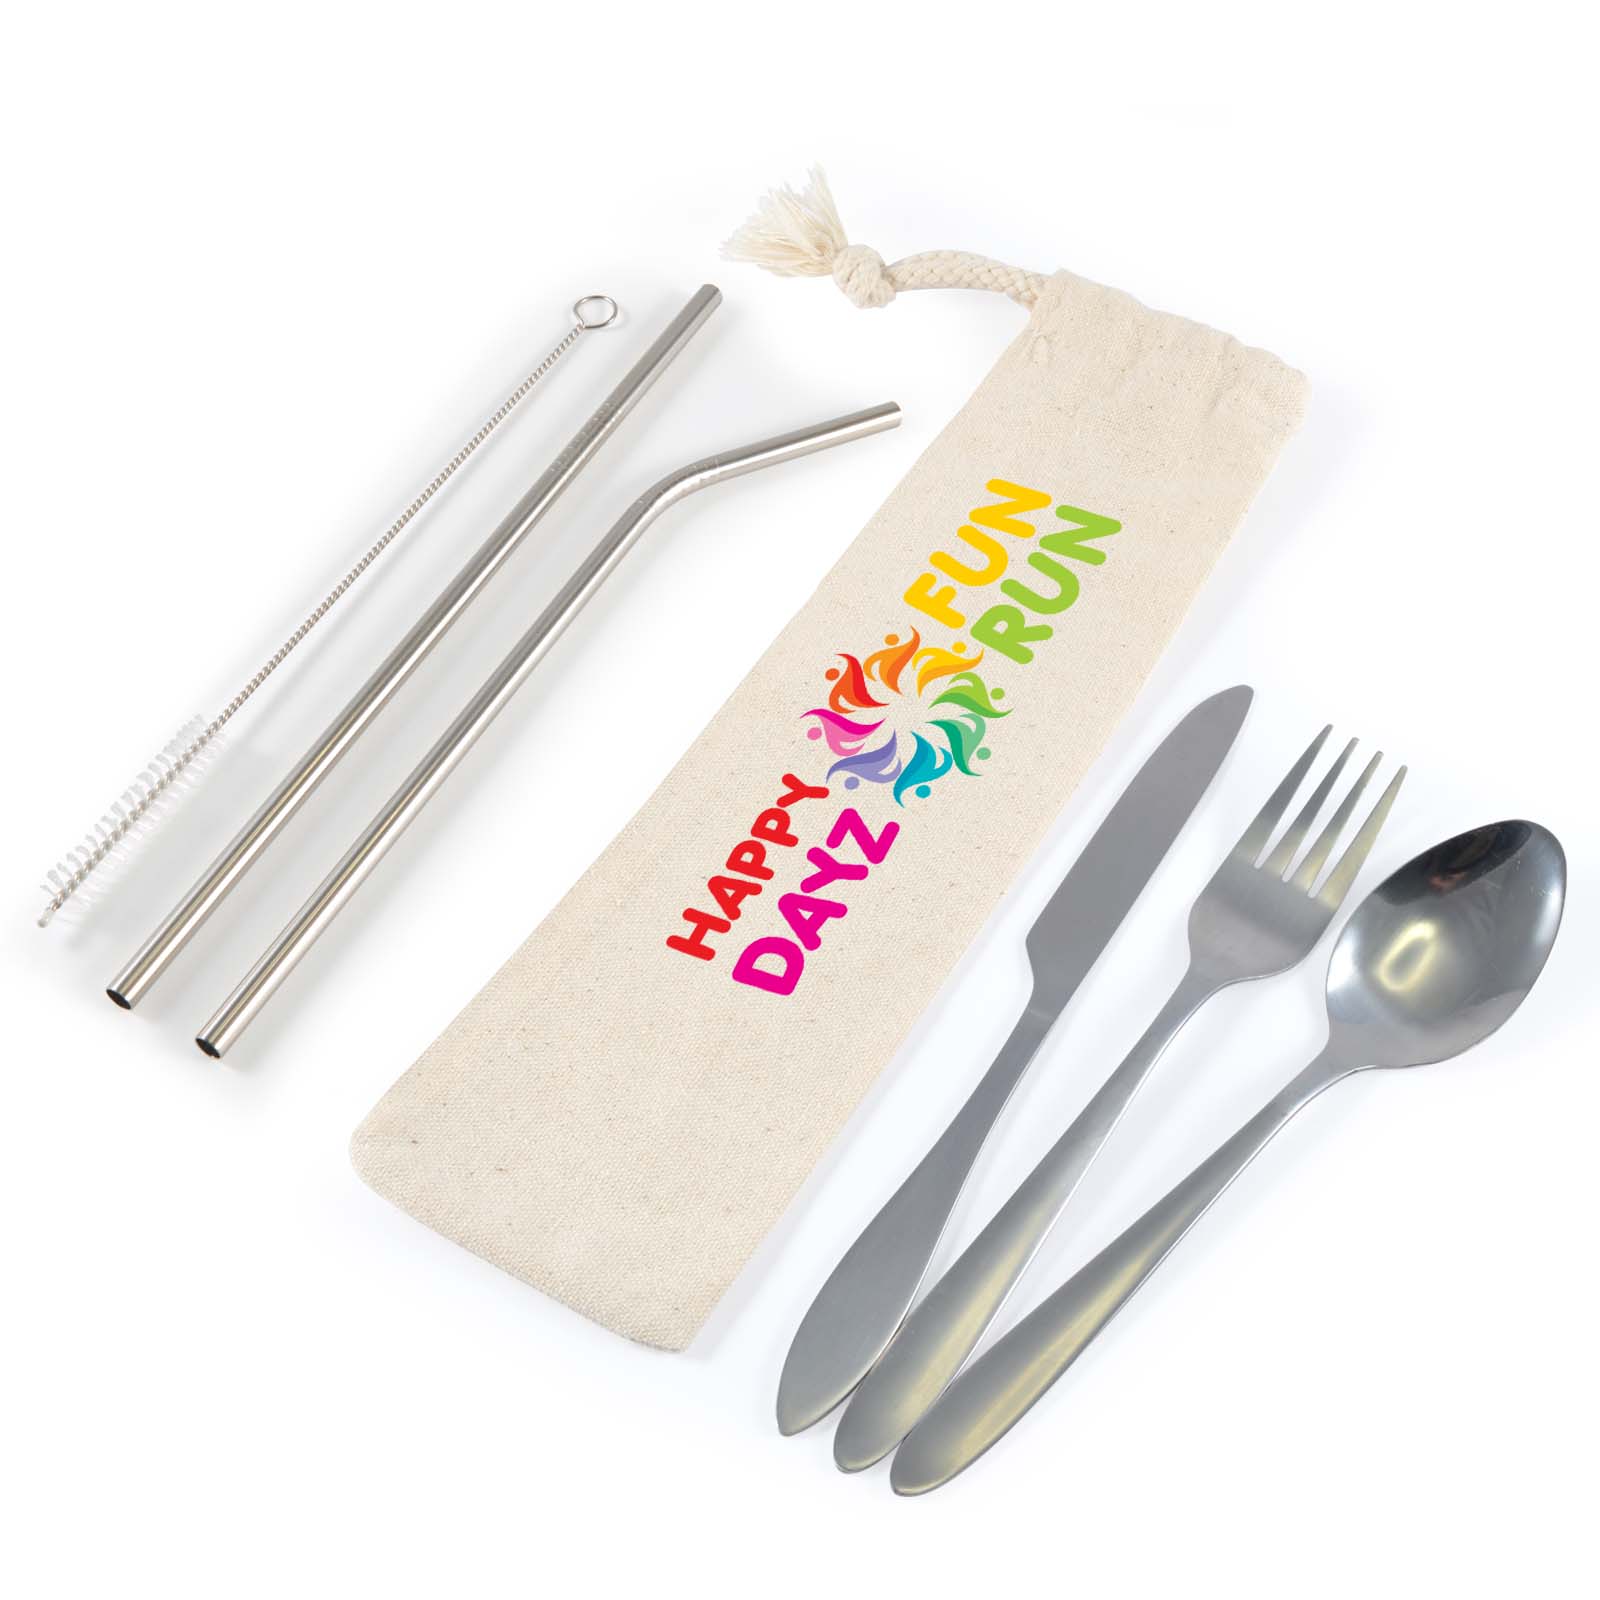 LL8800 - Banquet Stainless Steel Cutlery & Straw Set in Calico Pouch